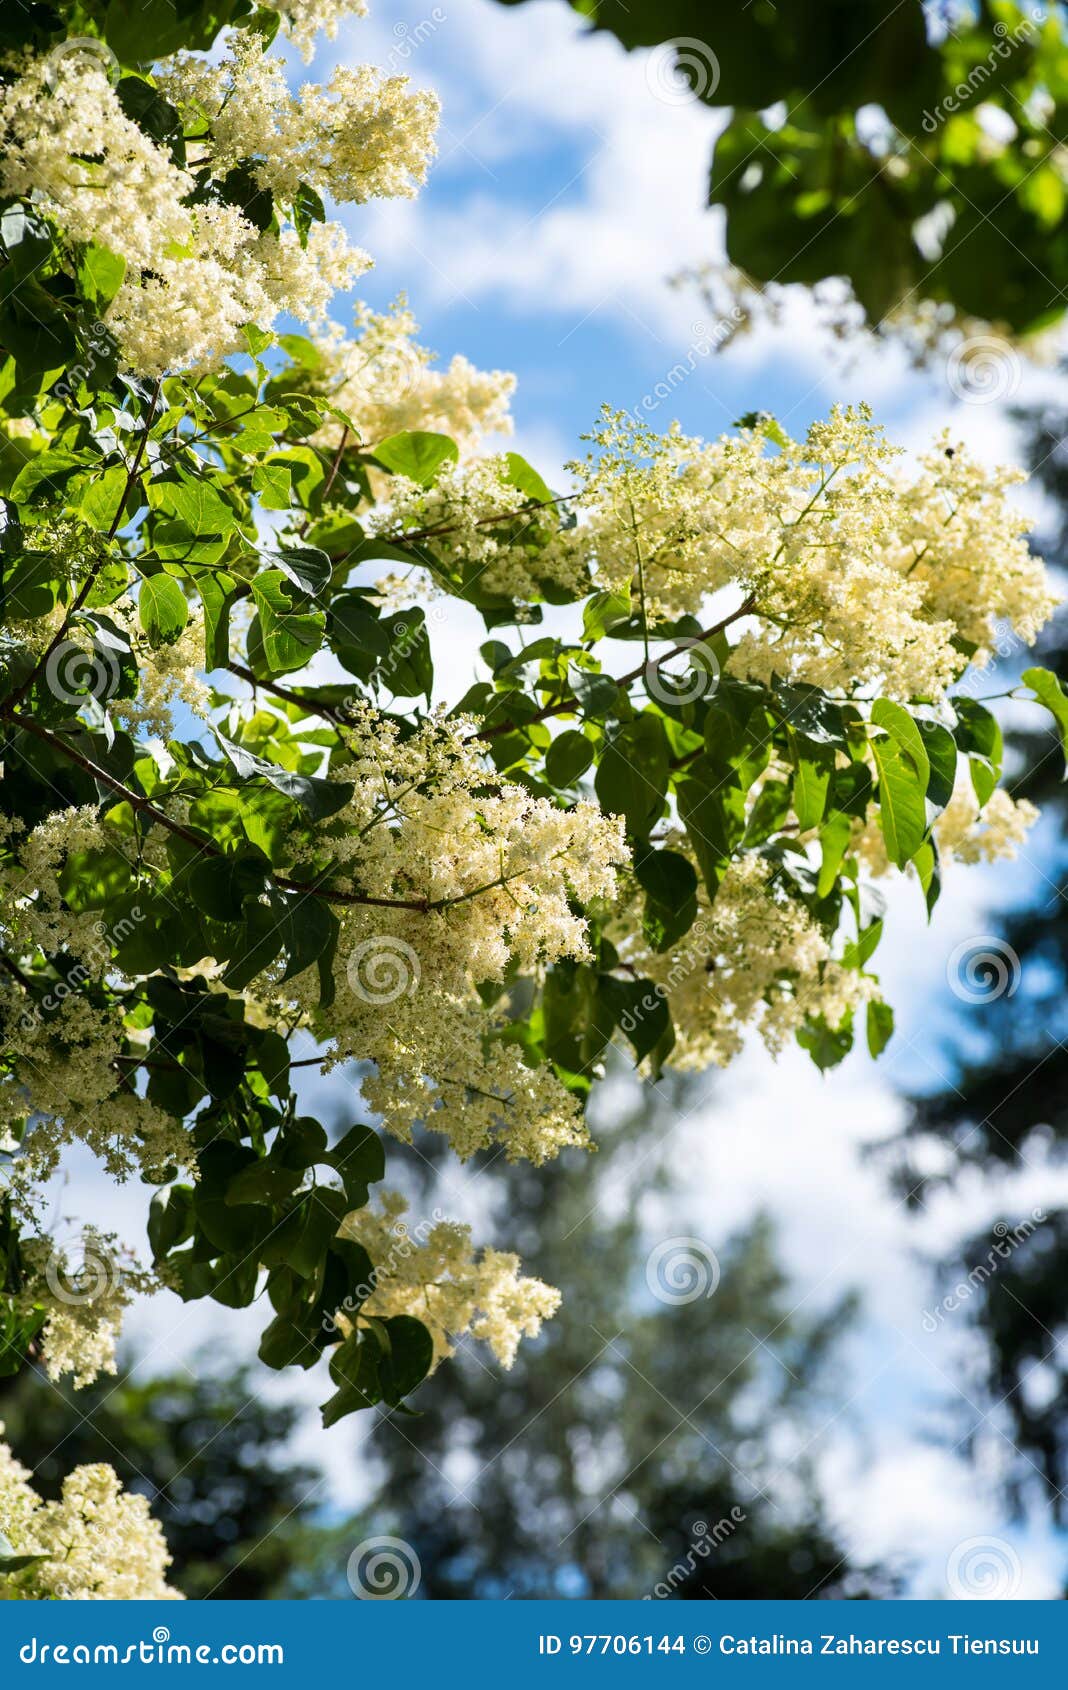 japanese tree lilac branches